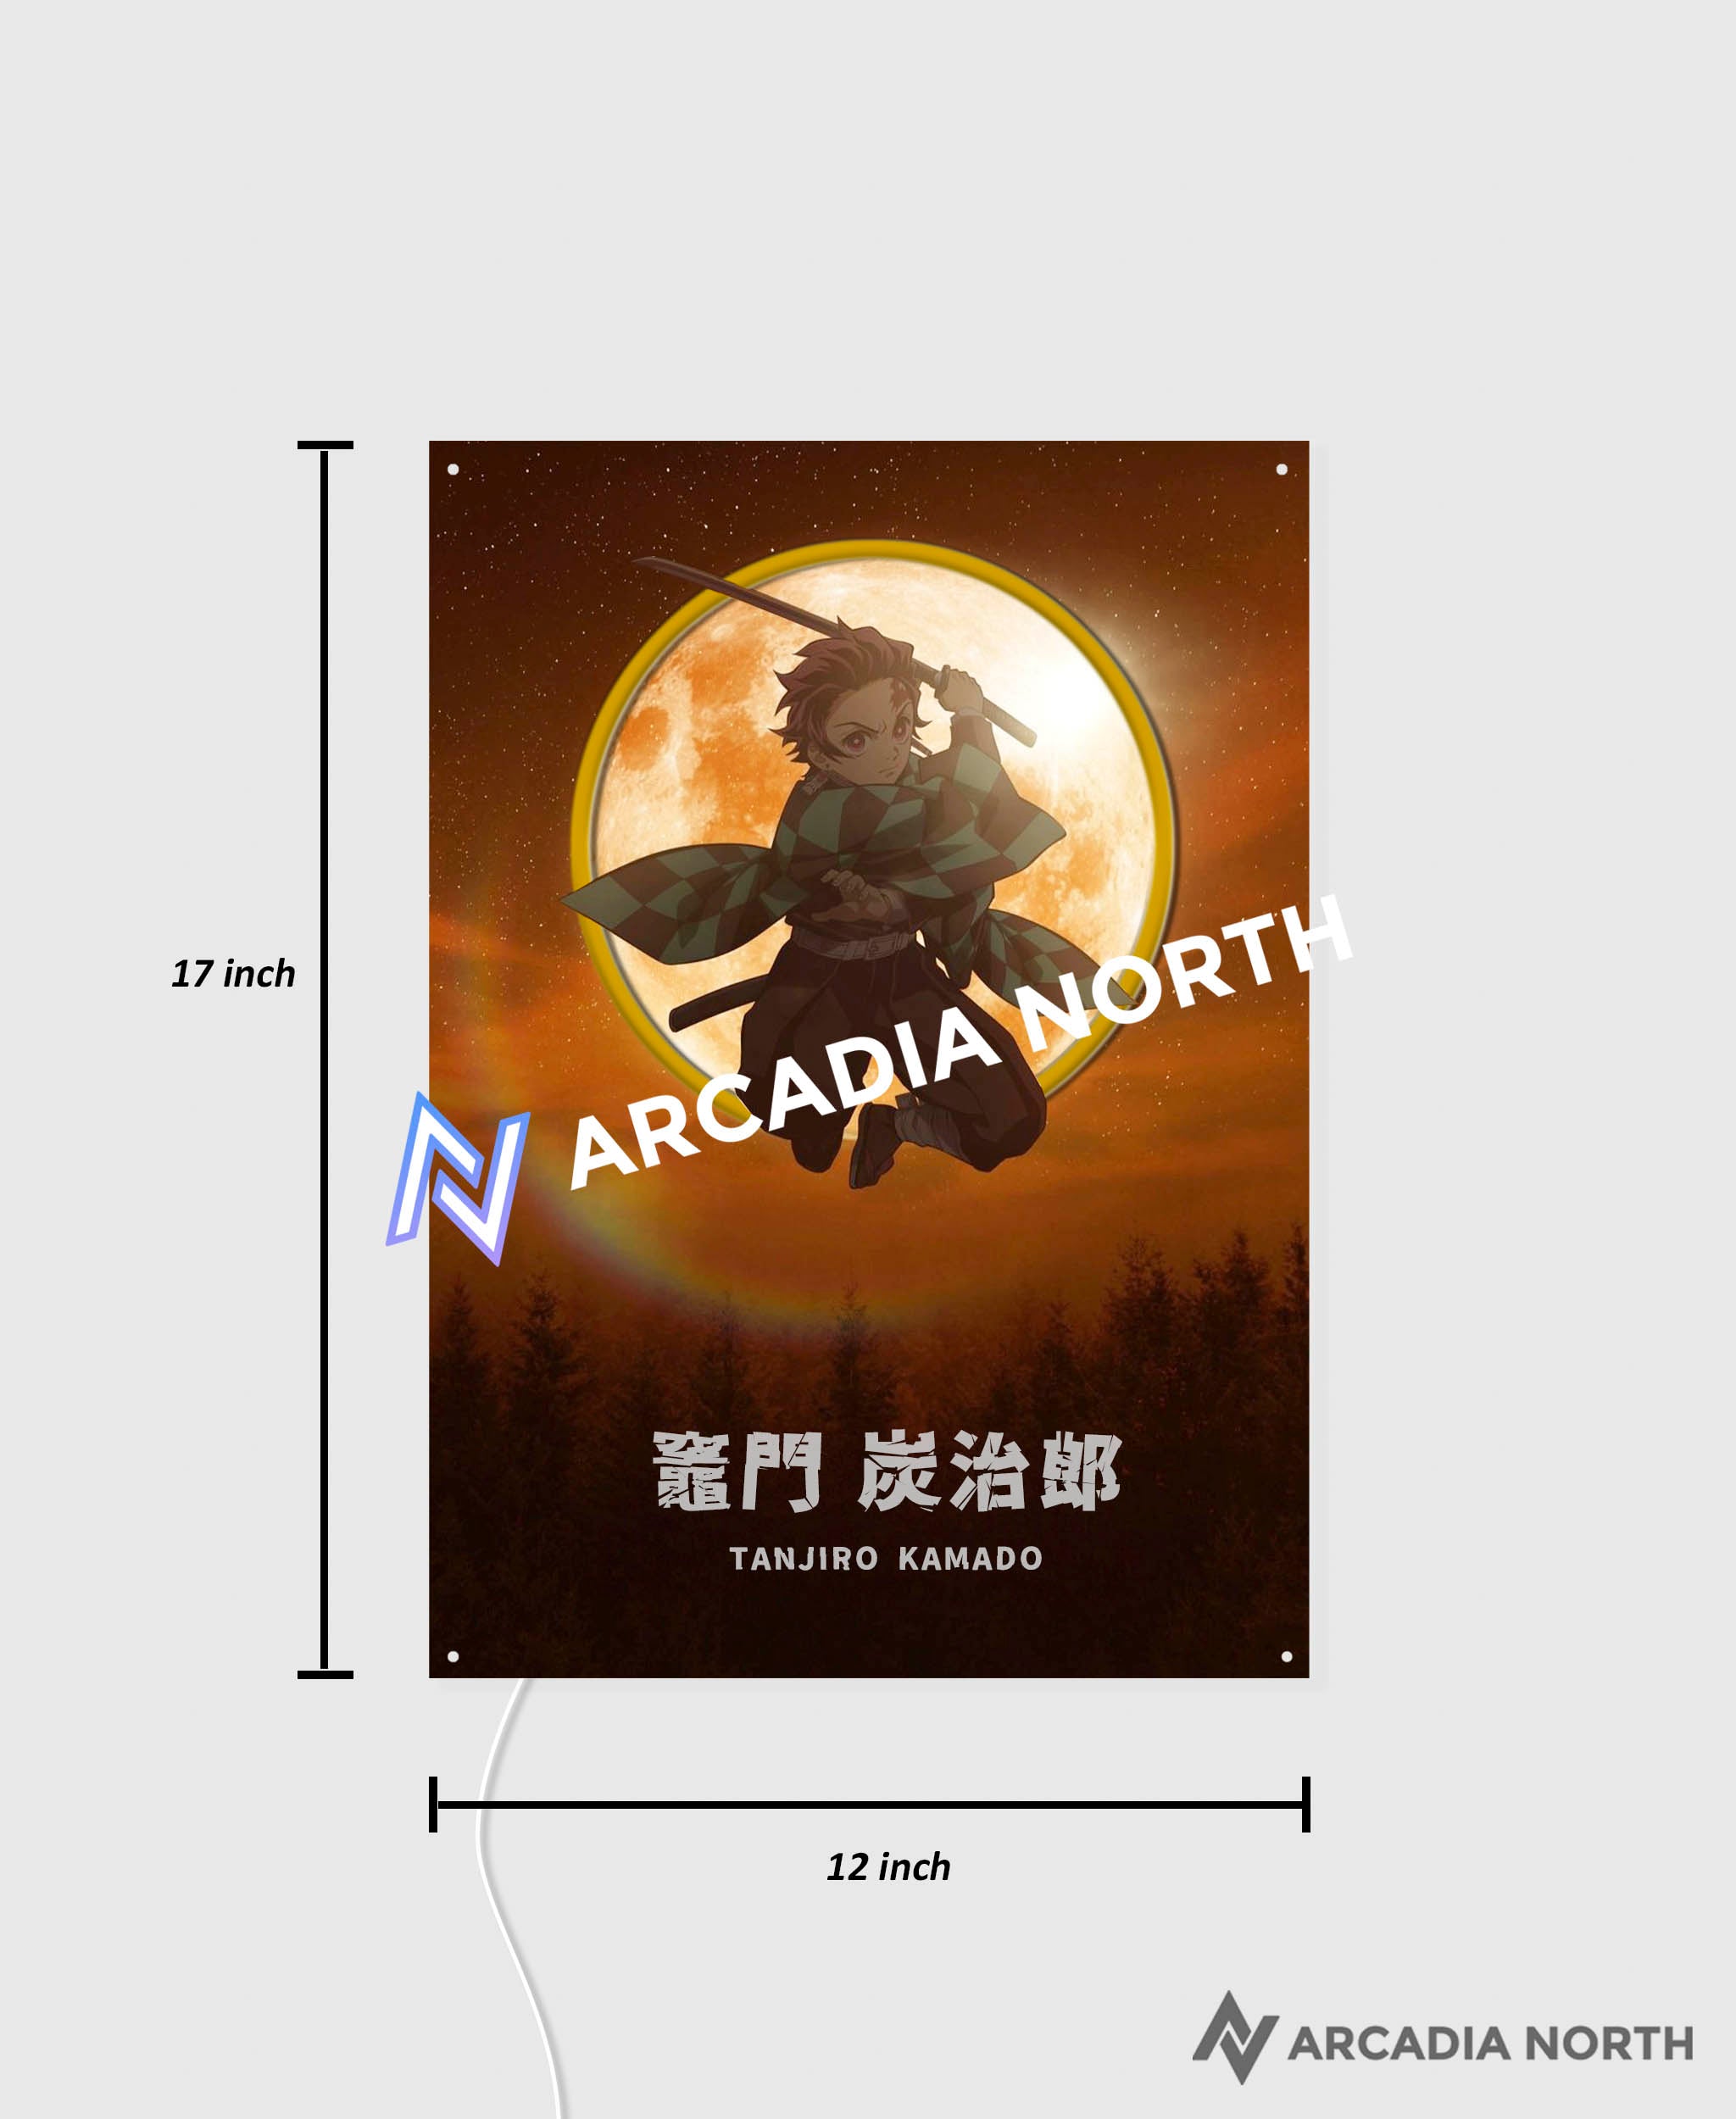 Arcadia North AURALIGHT Original LED Poster featuring the anime Demon Slayer with Tanjiro Kamado in front of a moon Illuminated by glowing neon LED lights. UV-printed on acrylic.